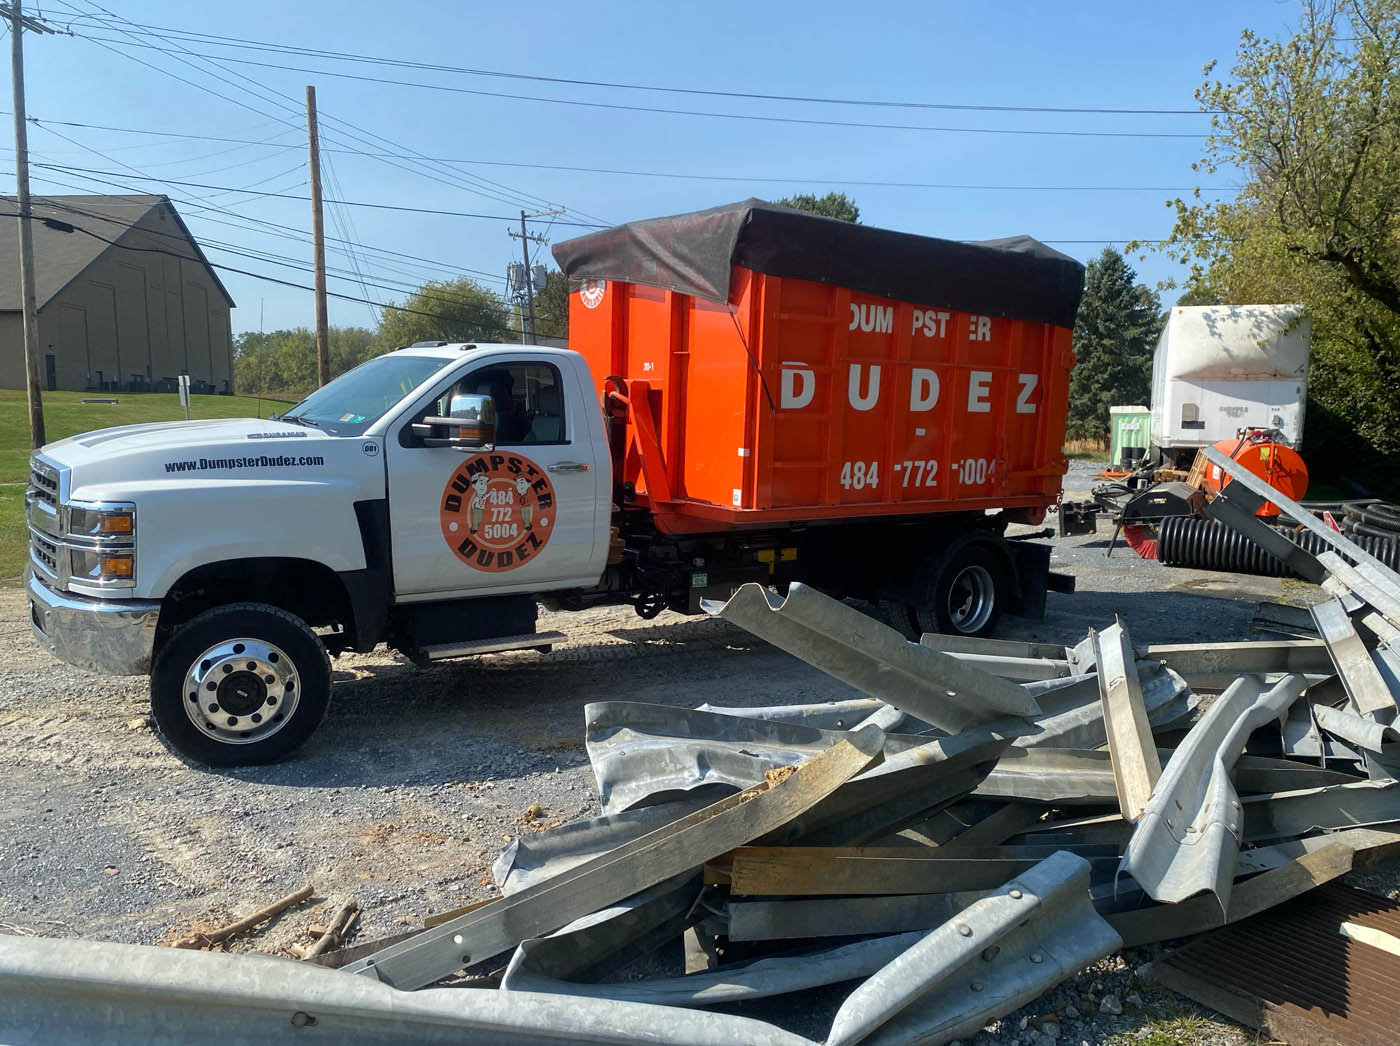 
				A Dumpster Dudez truck in front of debris - learn how to optimize the use of your dumpster rental.
			